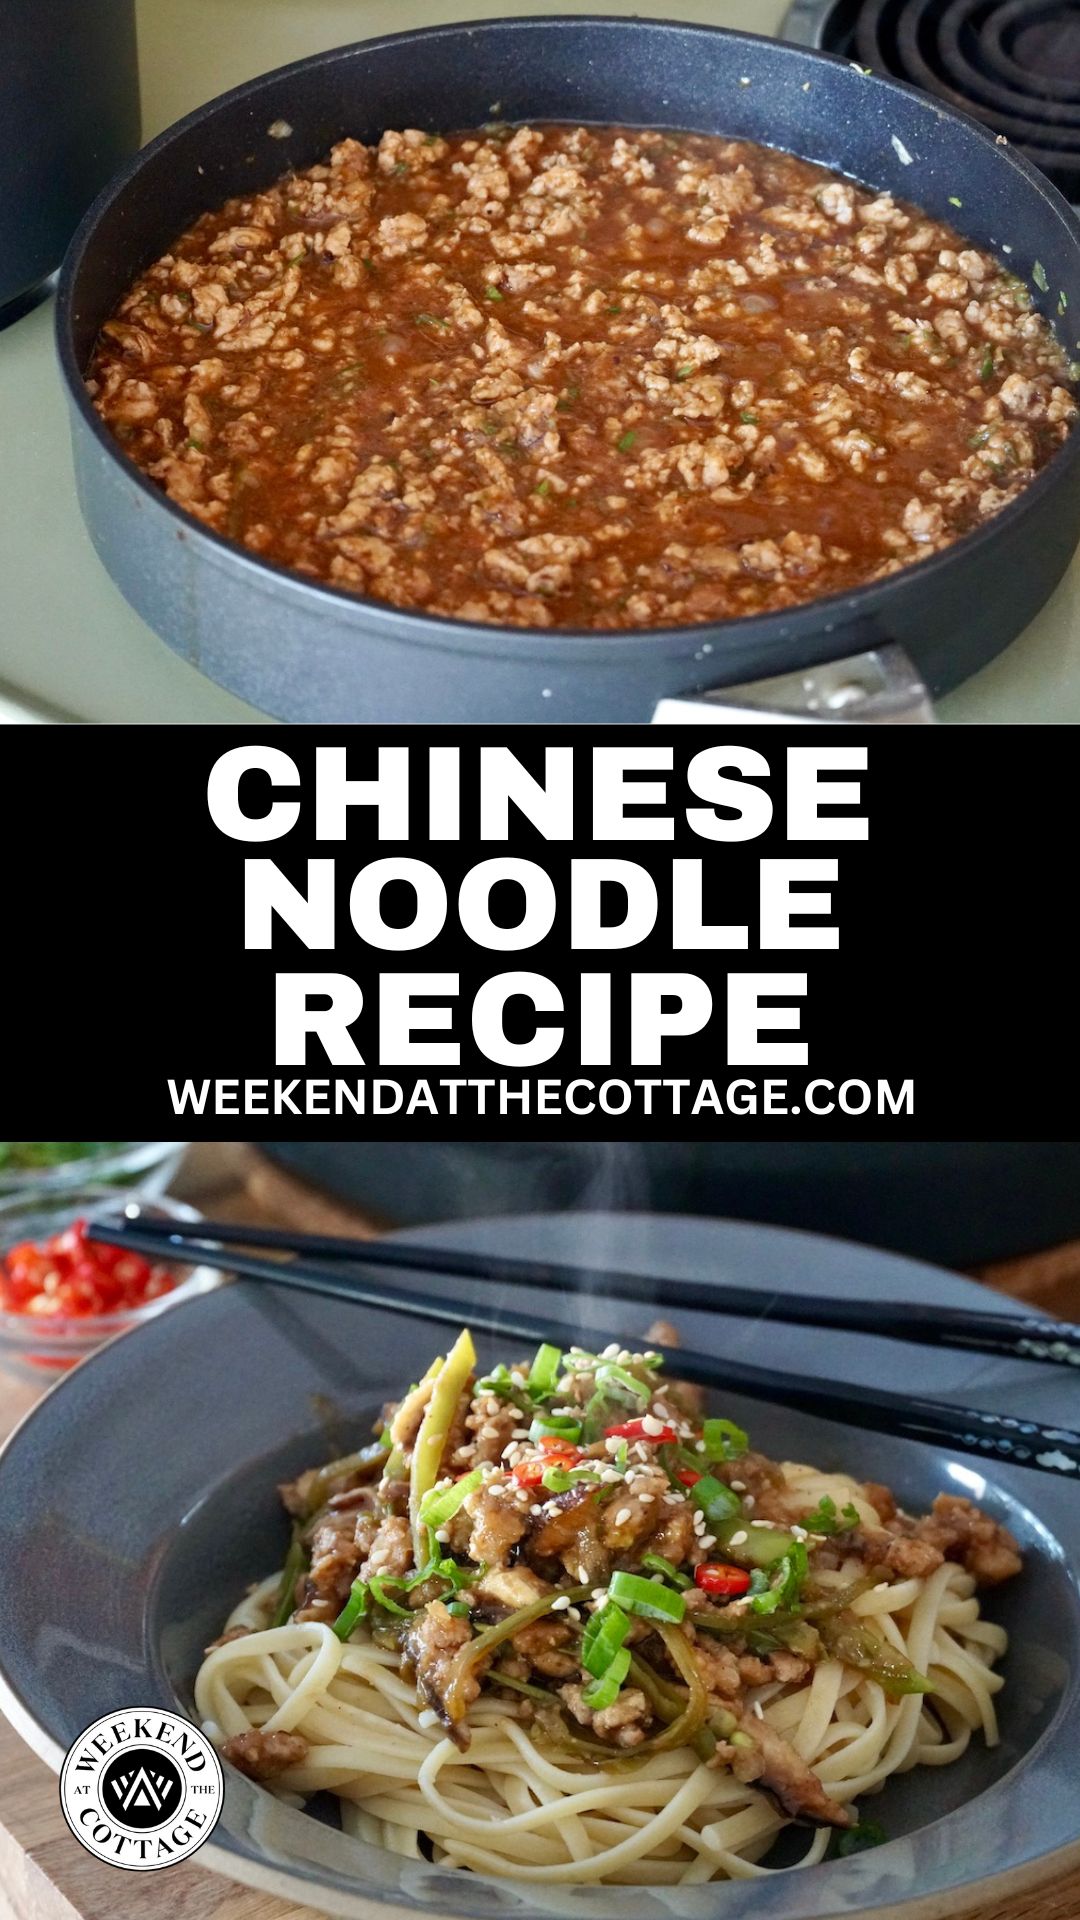 Chinese Noodle Recipe